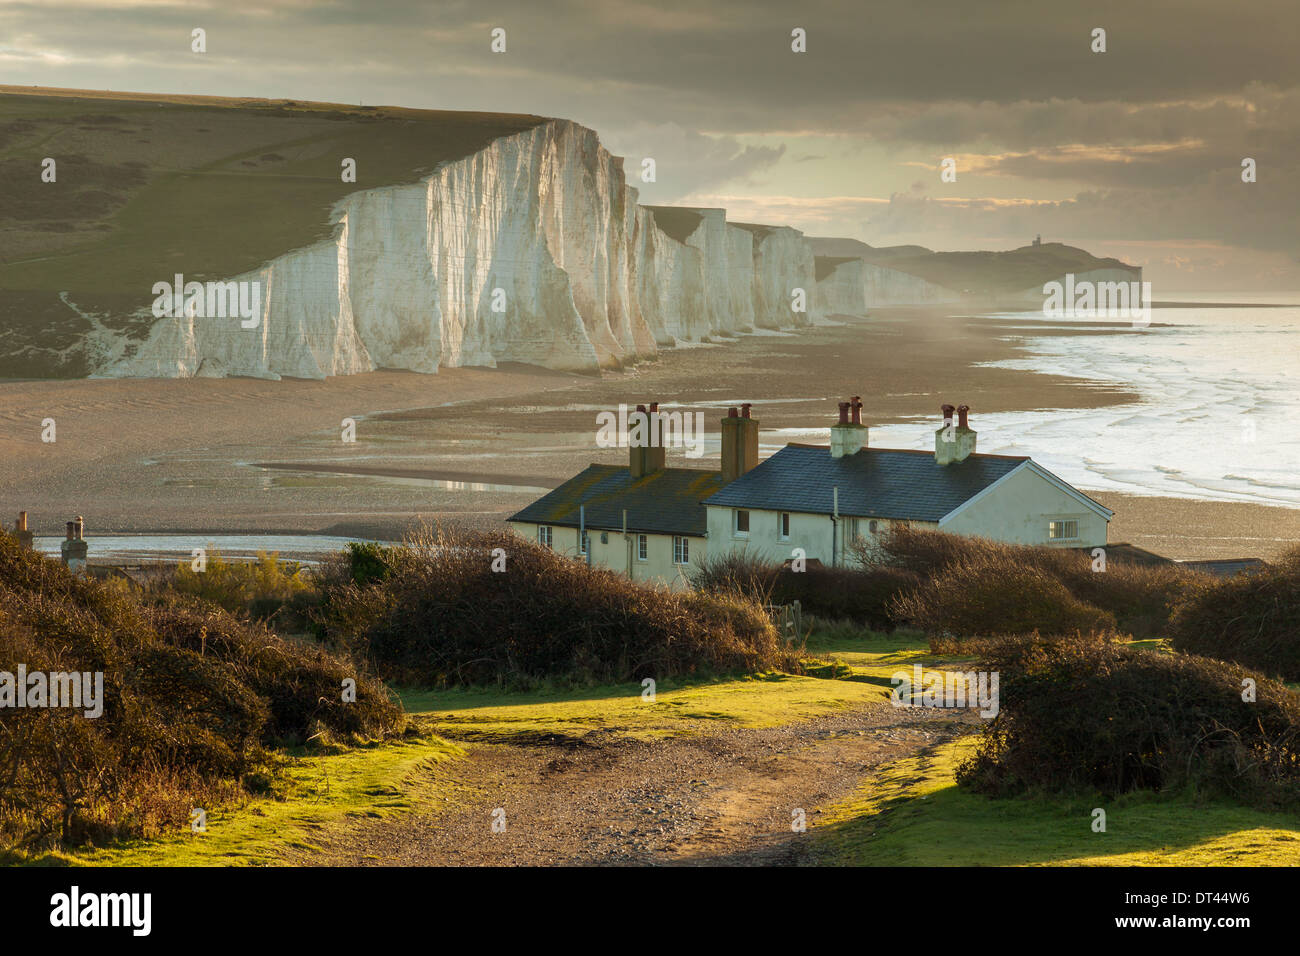 Coastguard Cottages and Seven Sisters cliffs, East Sussex, England. South Downs National Park. Stock Photo